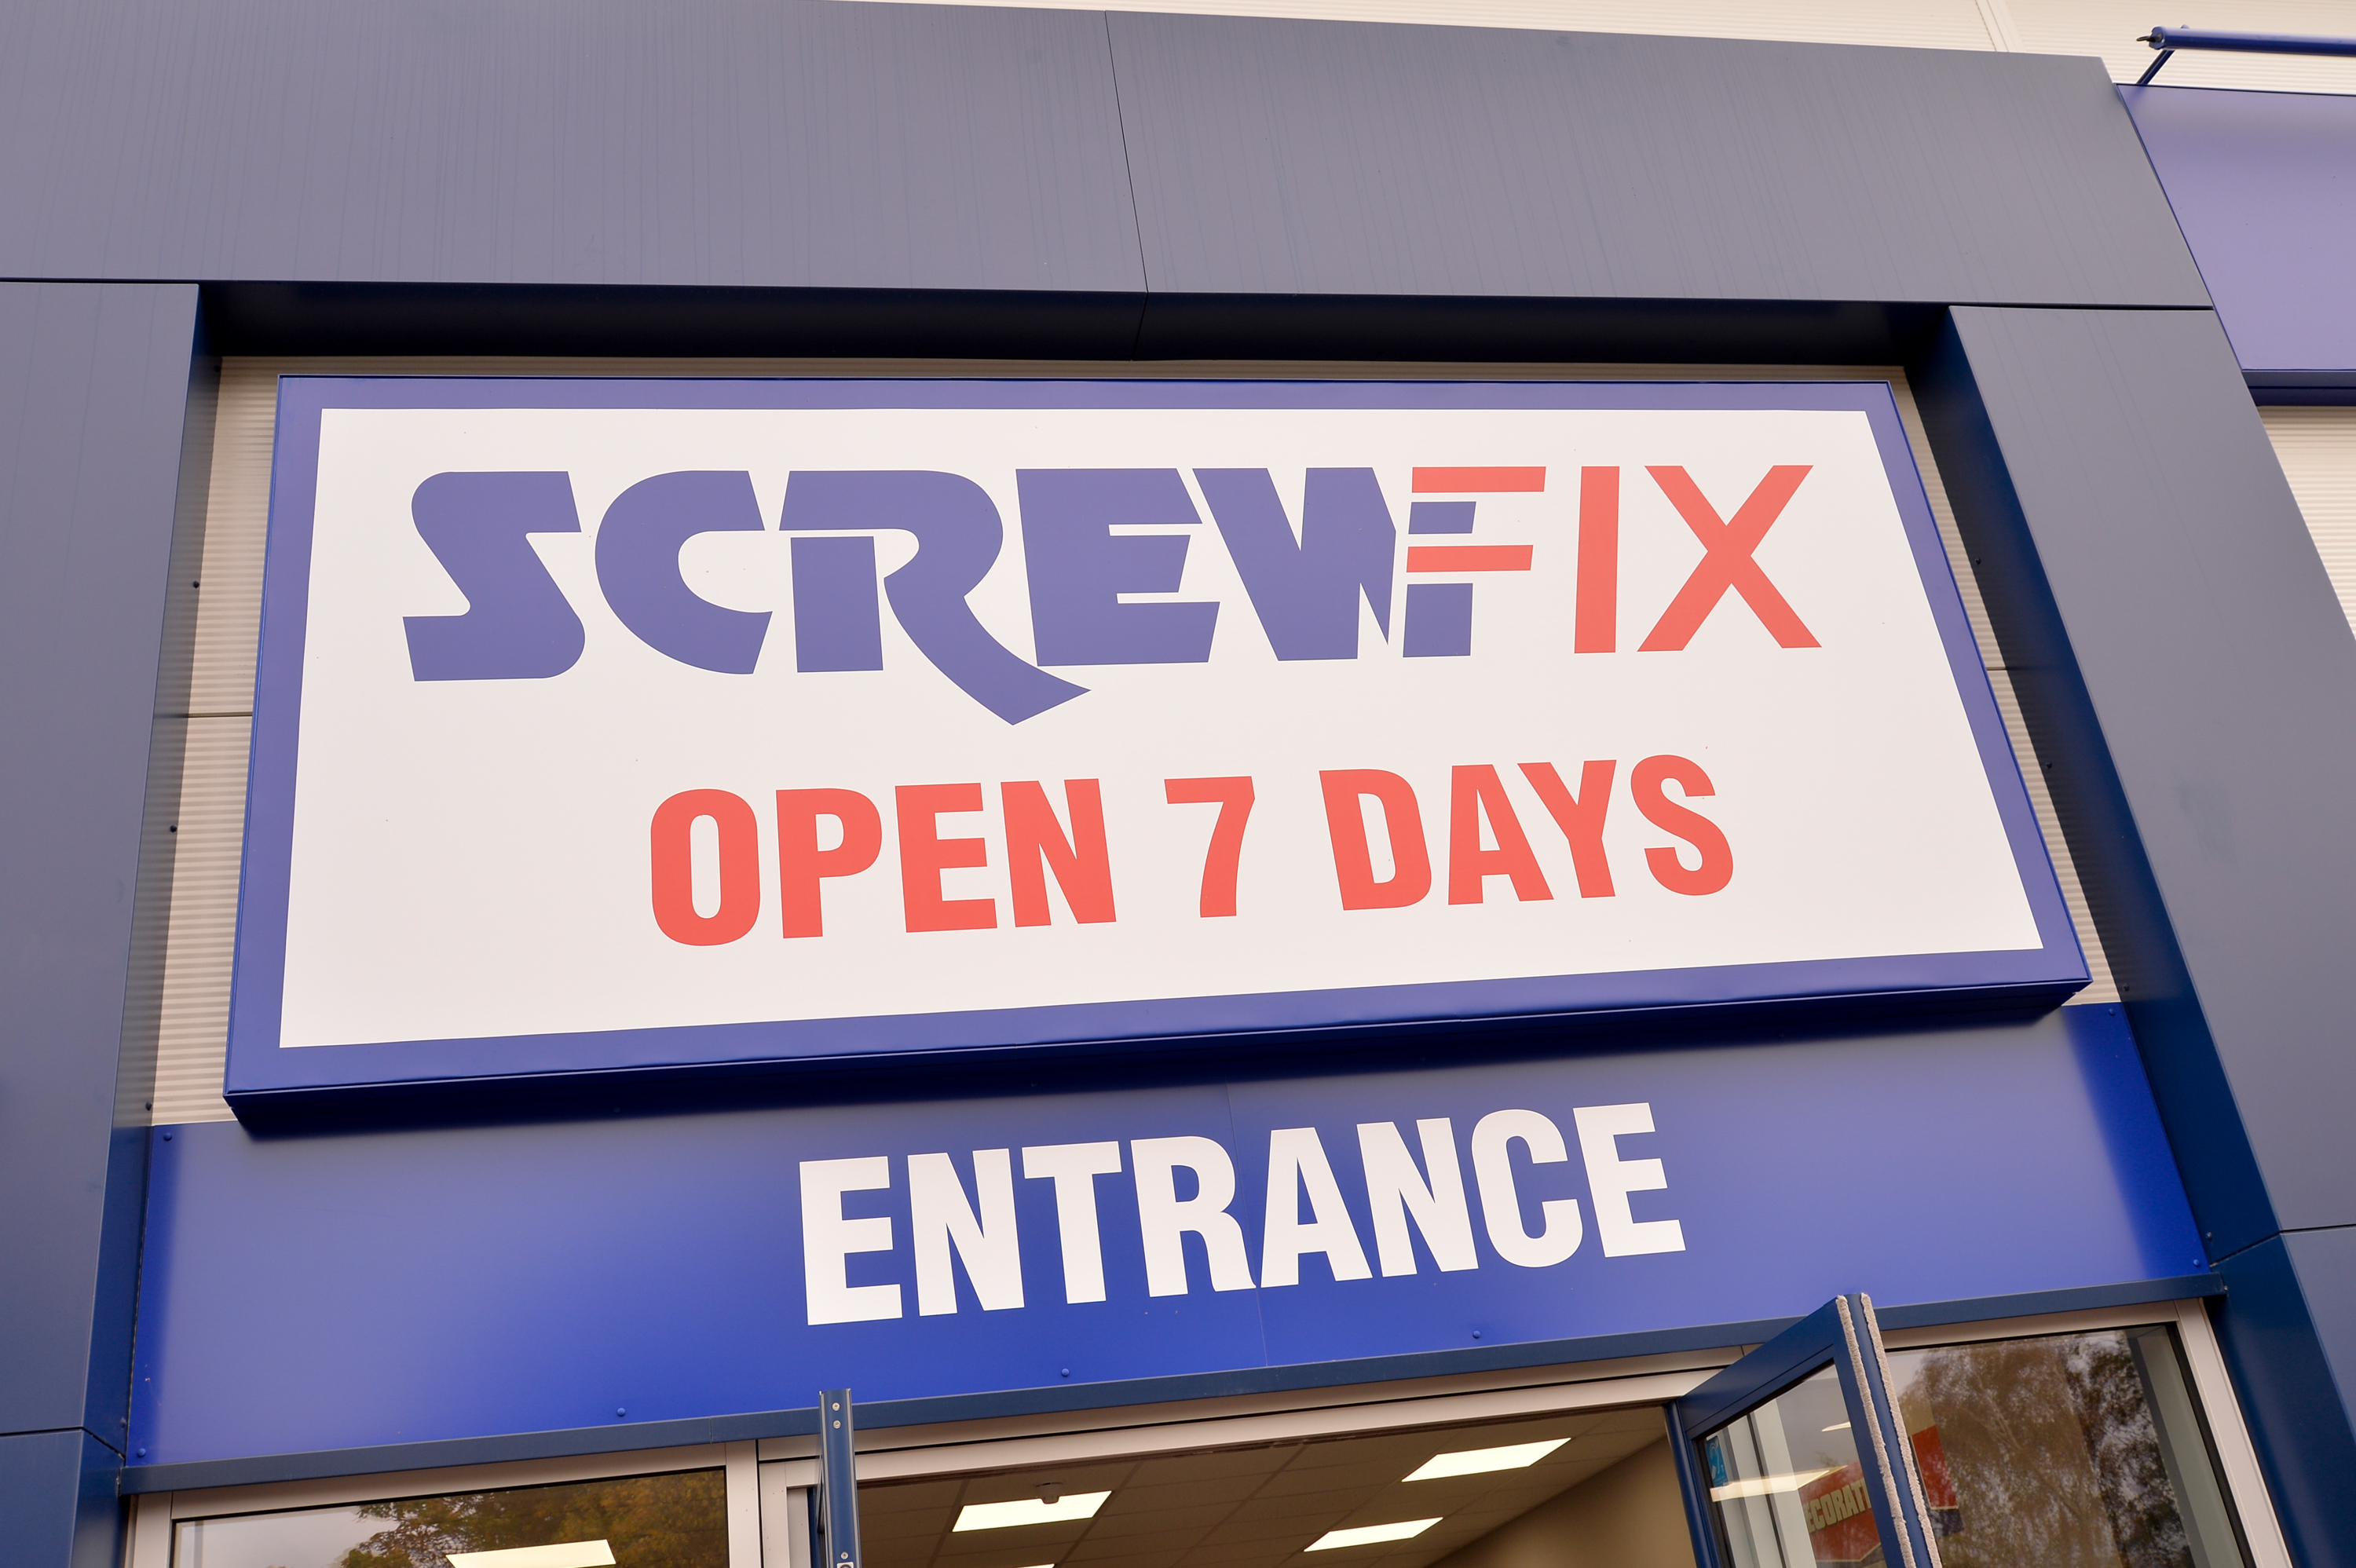 Carmarthen’s first Screwfix store to open on 5th November